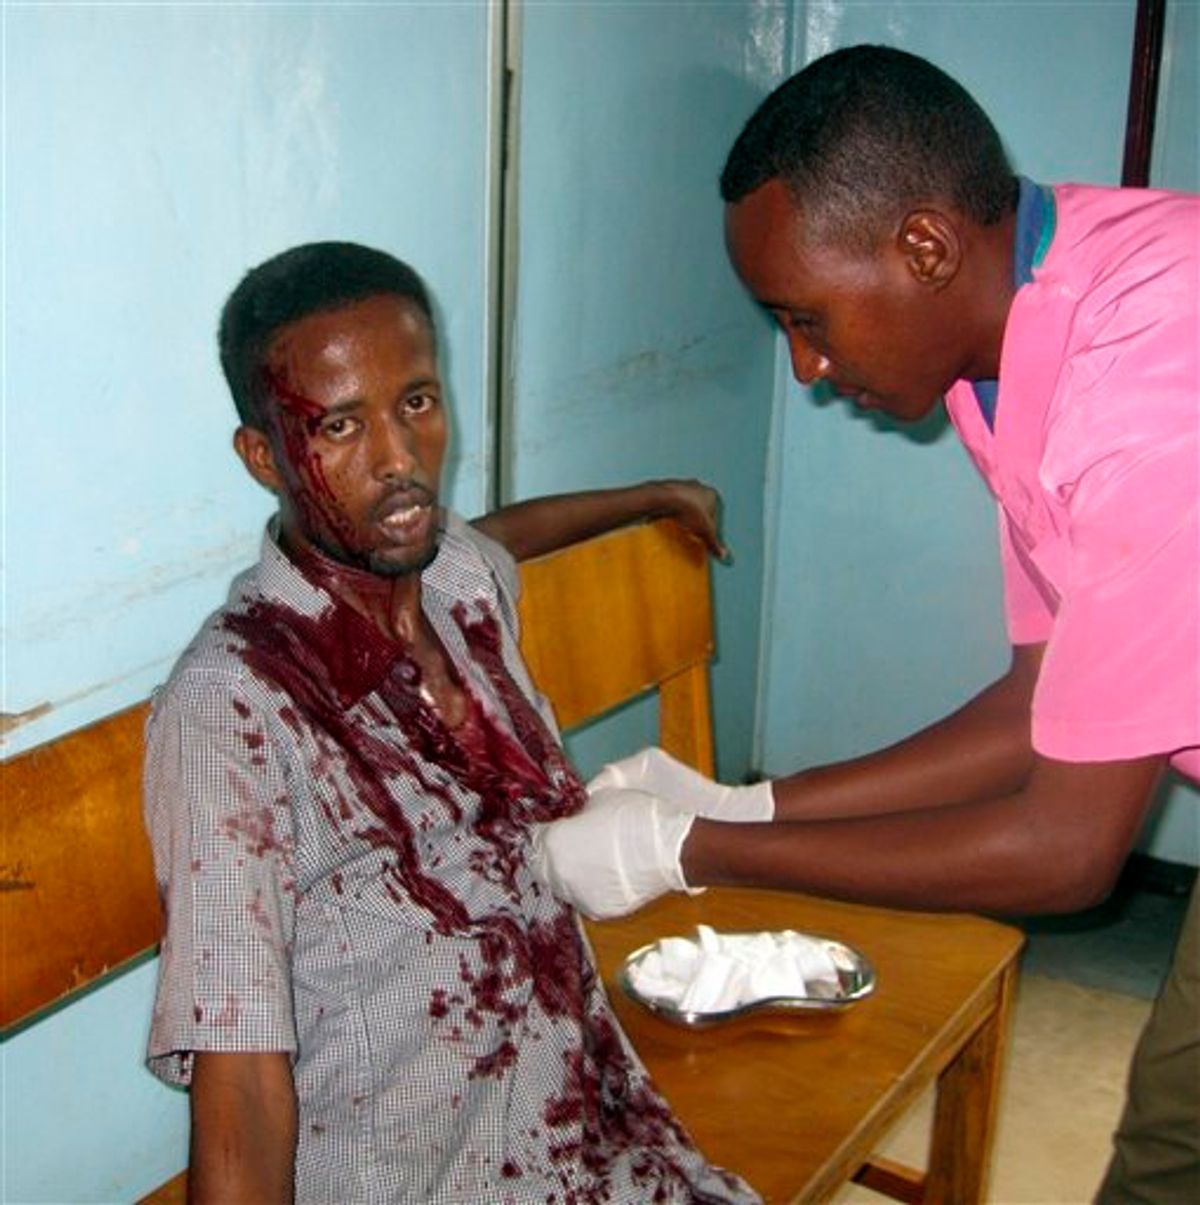 A nurse at Medina hospital treats a wounded civilian,at Medina hospital, Mogadishu, Somalia, Tuesday, Aug. 24, 2010. after he was wounded by mortar shrapnel during fighting between Somali insurgents and African Union troops. A suicide bomber and gunmen stormed a hotel in Somalia's capital on Tuesday, killing at least 15 people including members of parliament in an attack that set off an hour-long gun battle, a military spokesman and a witness said. (AP Photo/ Mohamed Sheikh Nor)  (AP)